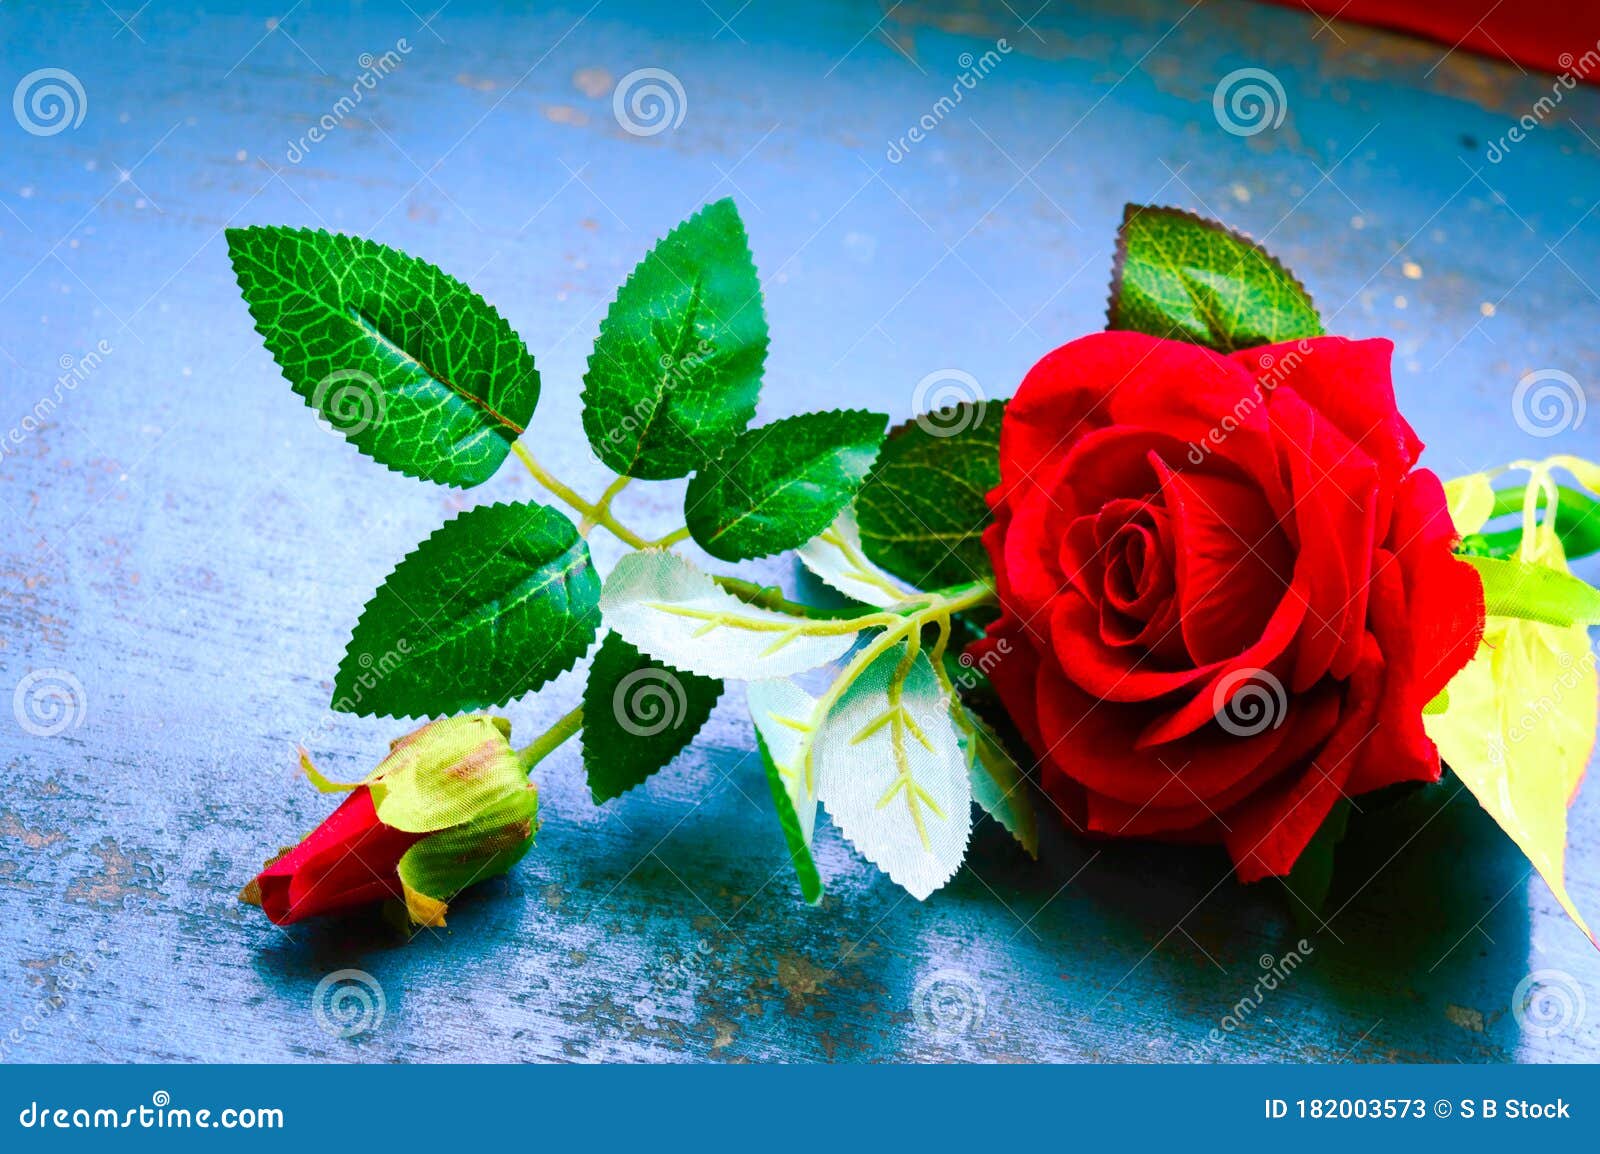 Red Rose Flower on Rustic Floor. Nature Still Life Love Romantic Background  Theme Stock Image - Image of backdrop, anniversary: 182003573